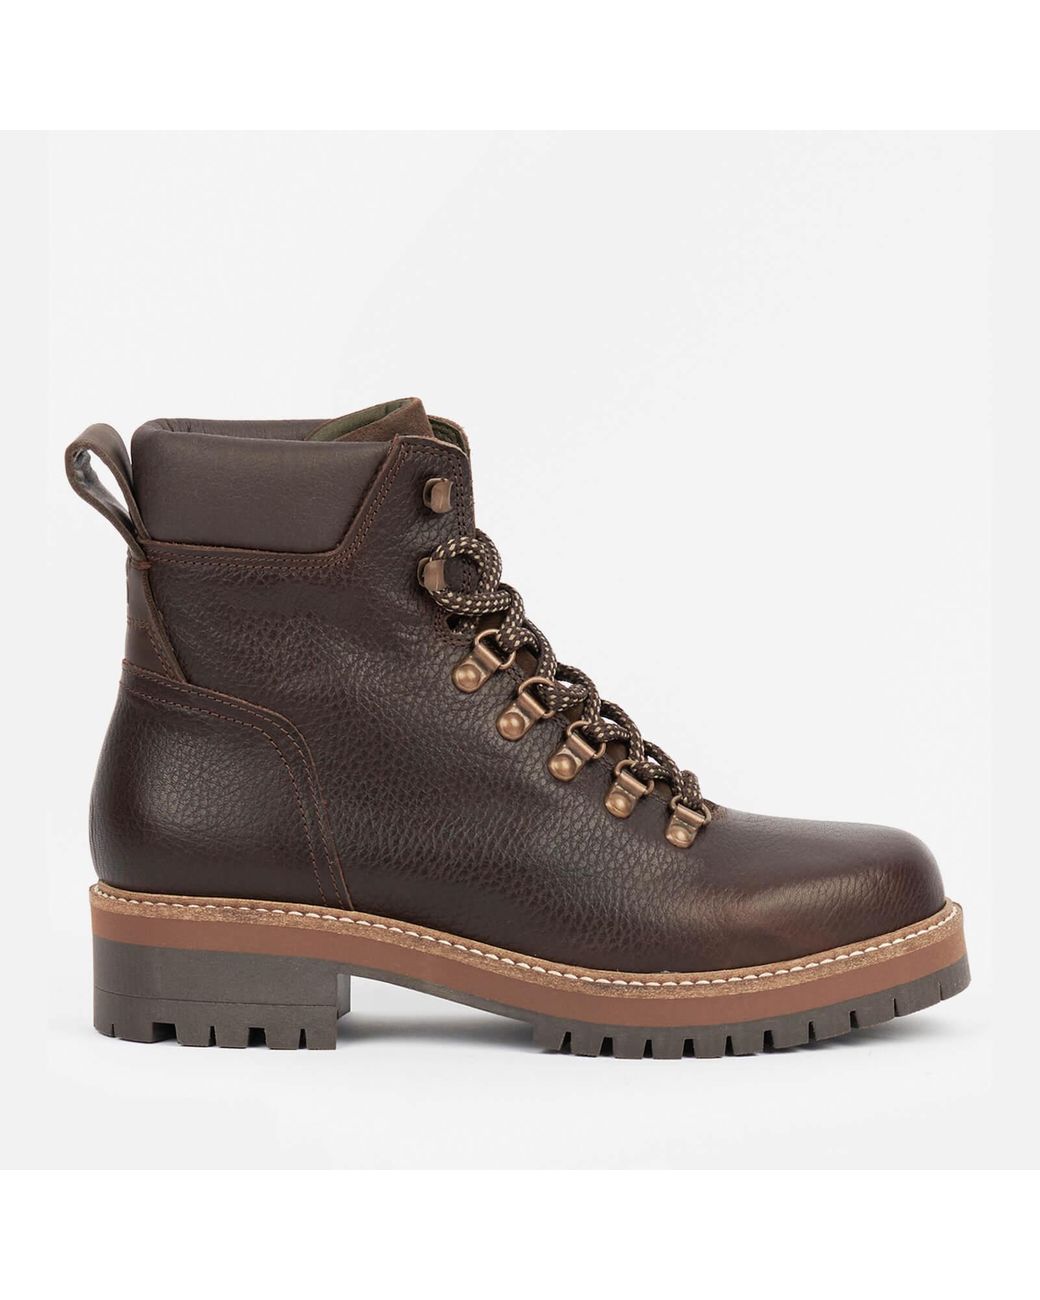 Barbour Stanton Leather Boots in Brown | Lyst